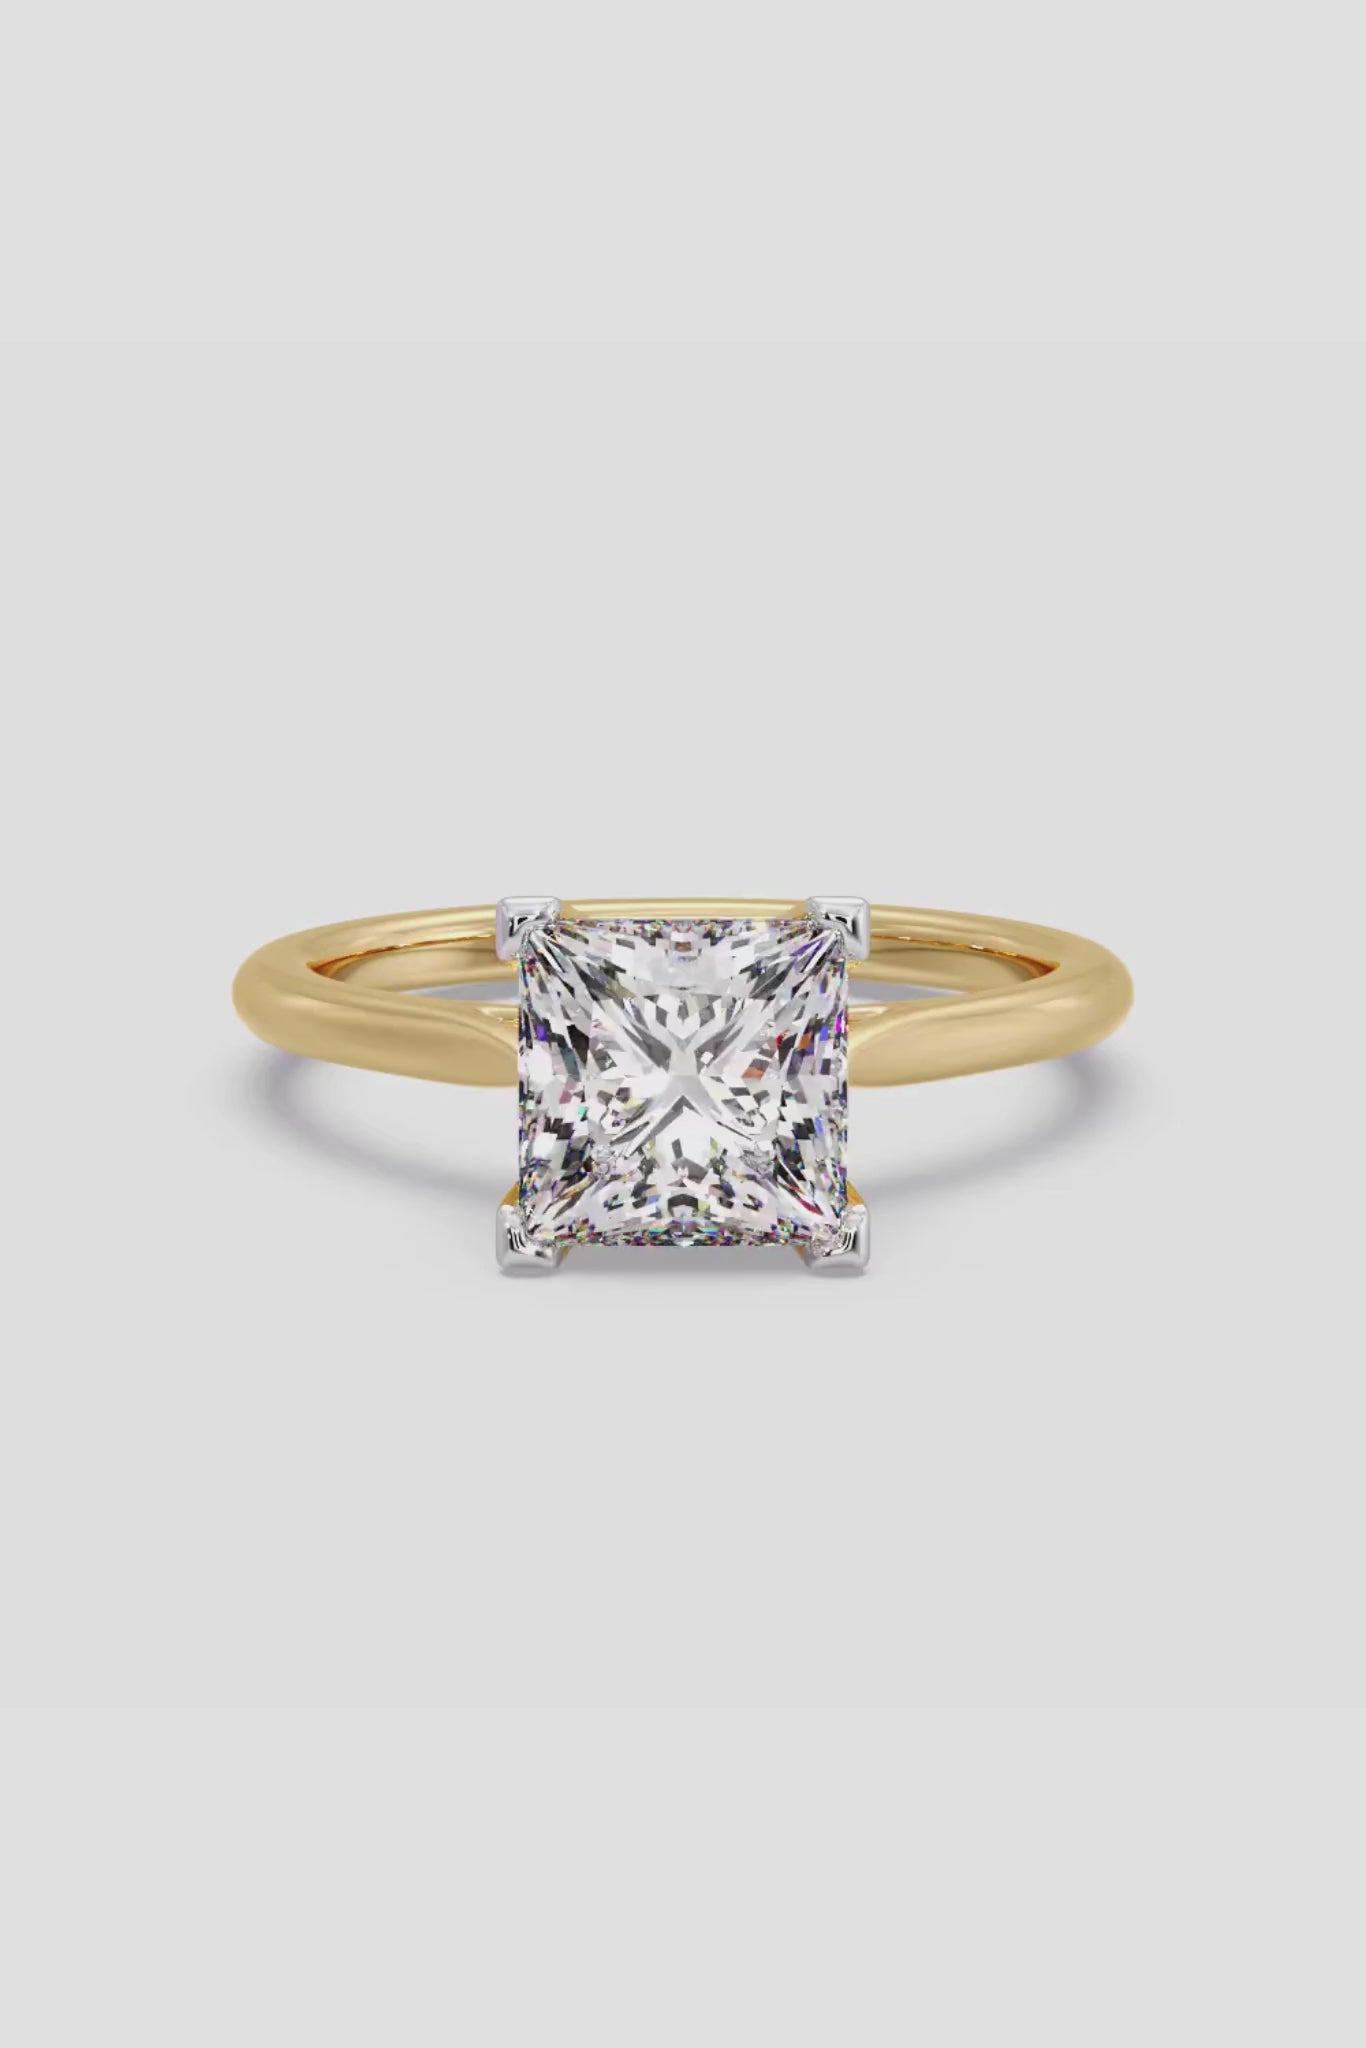 2 ct Princess Solitaire Ring